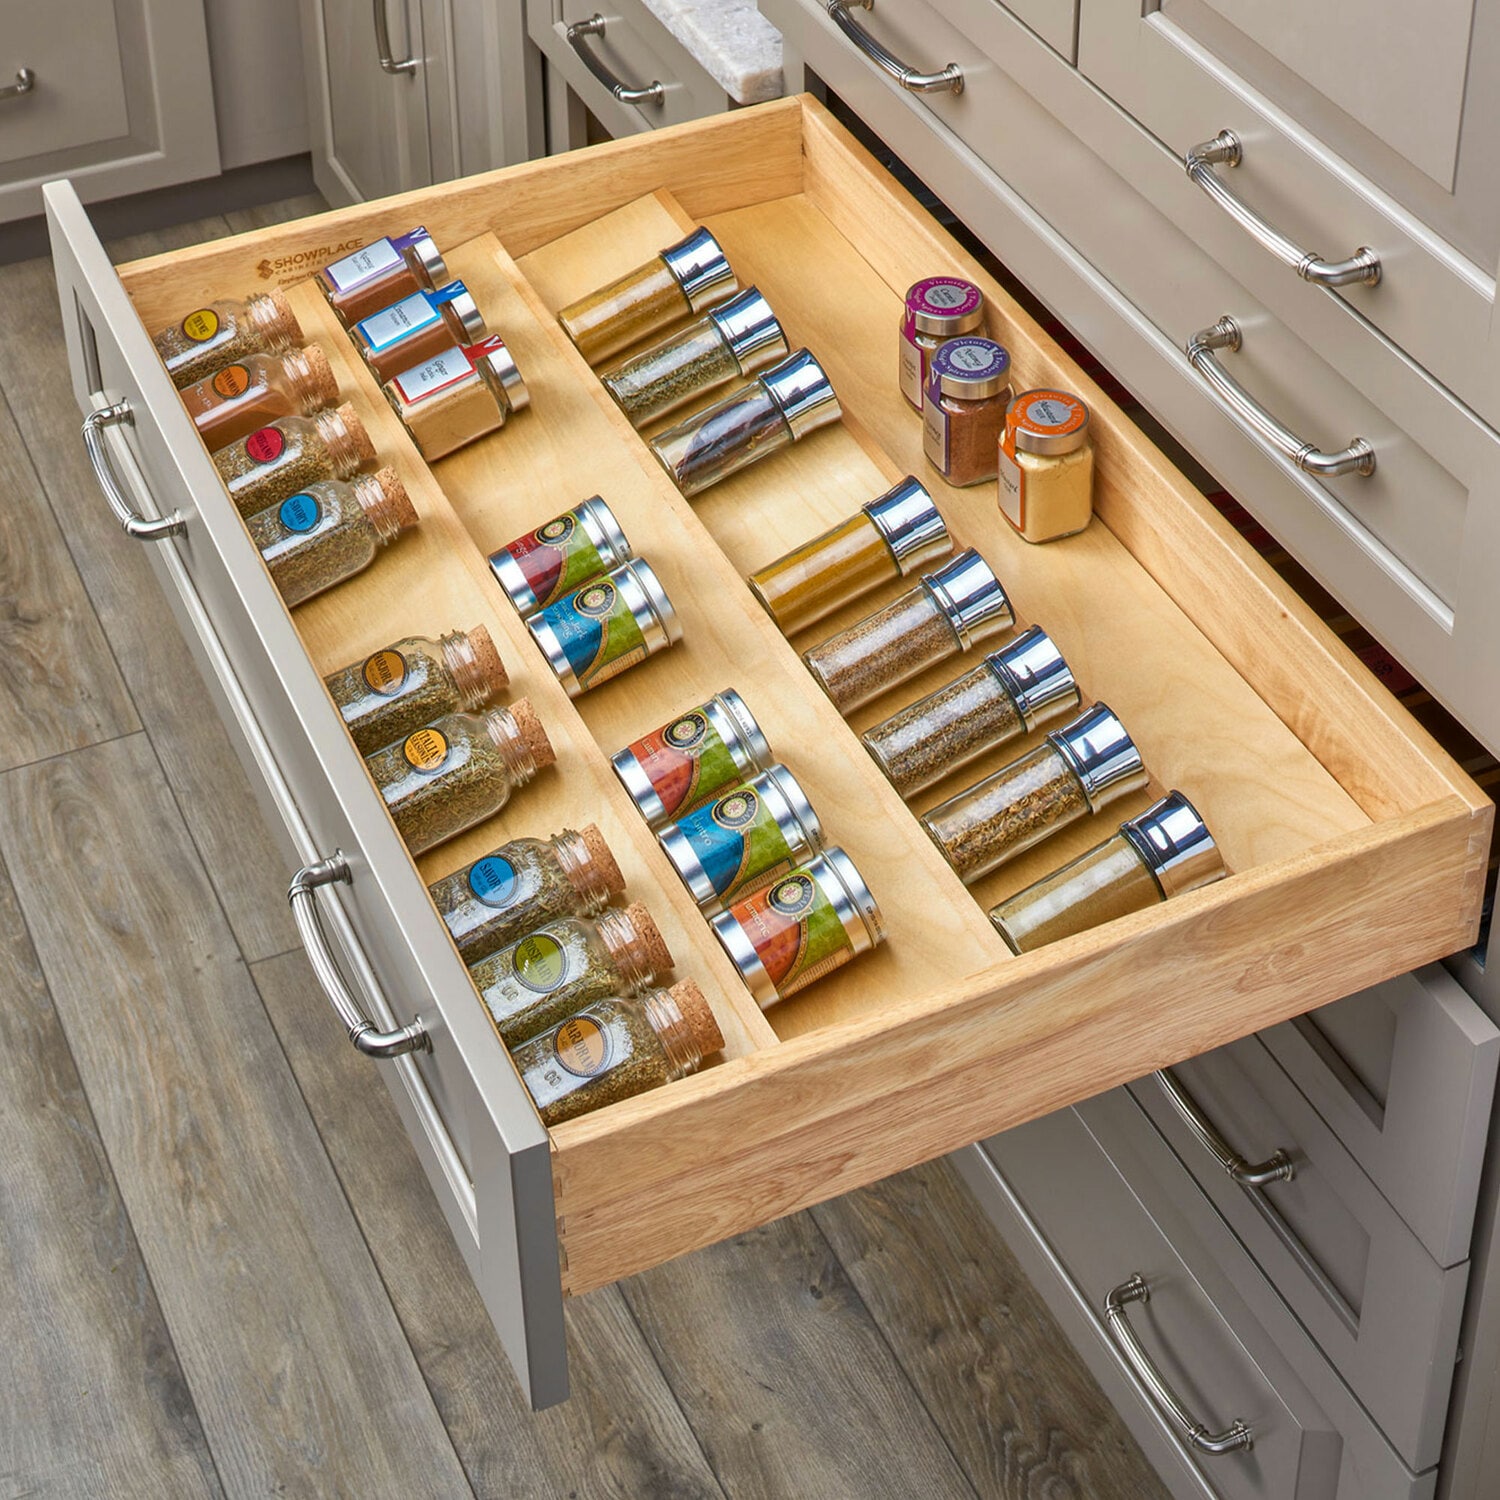 Viviendo Pantry Kitchen Sauce/Spice Rack with drawers